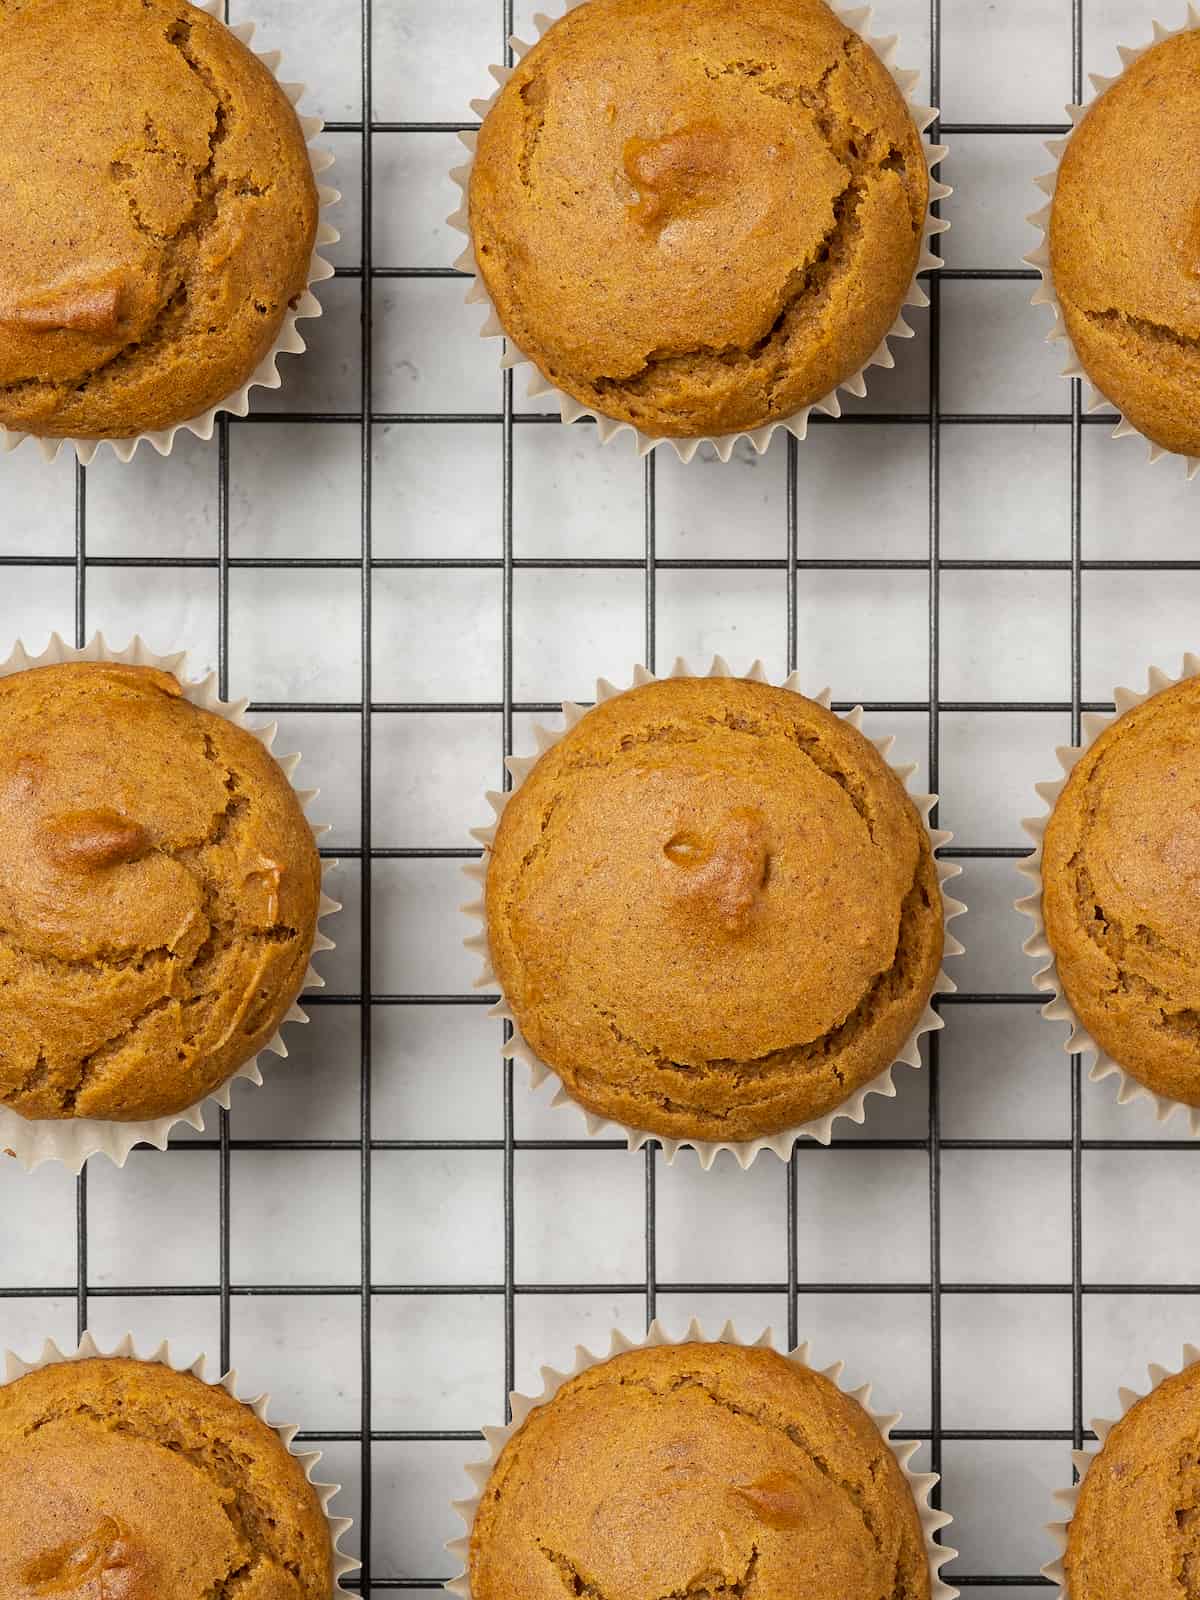 Top view of rows of baked gluten free pumpkin cupcakes on a wire rack.